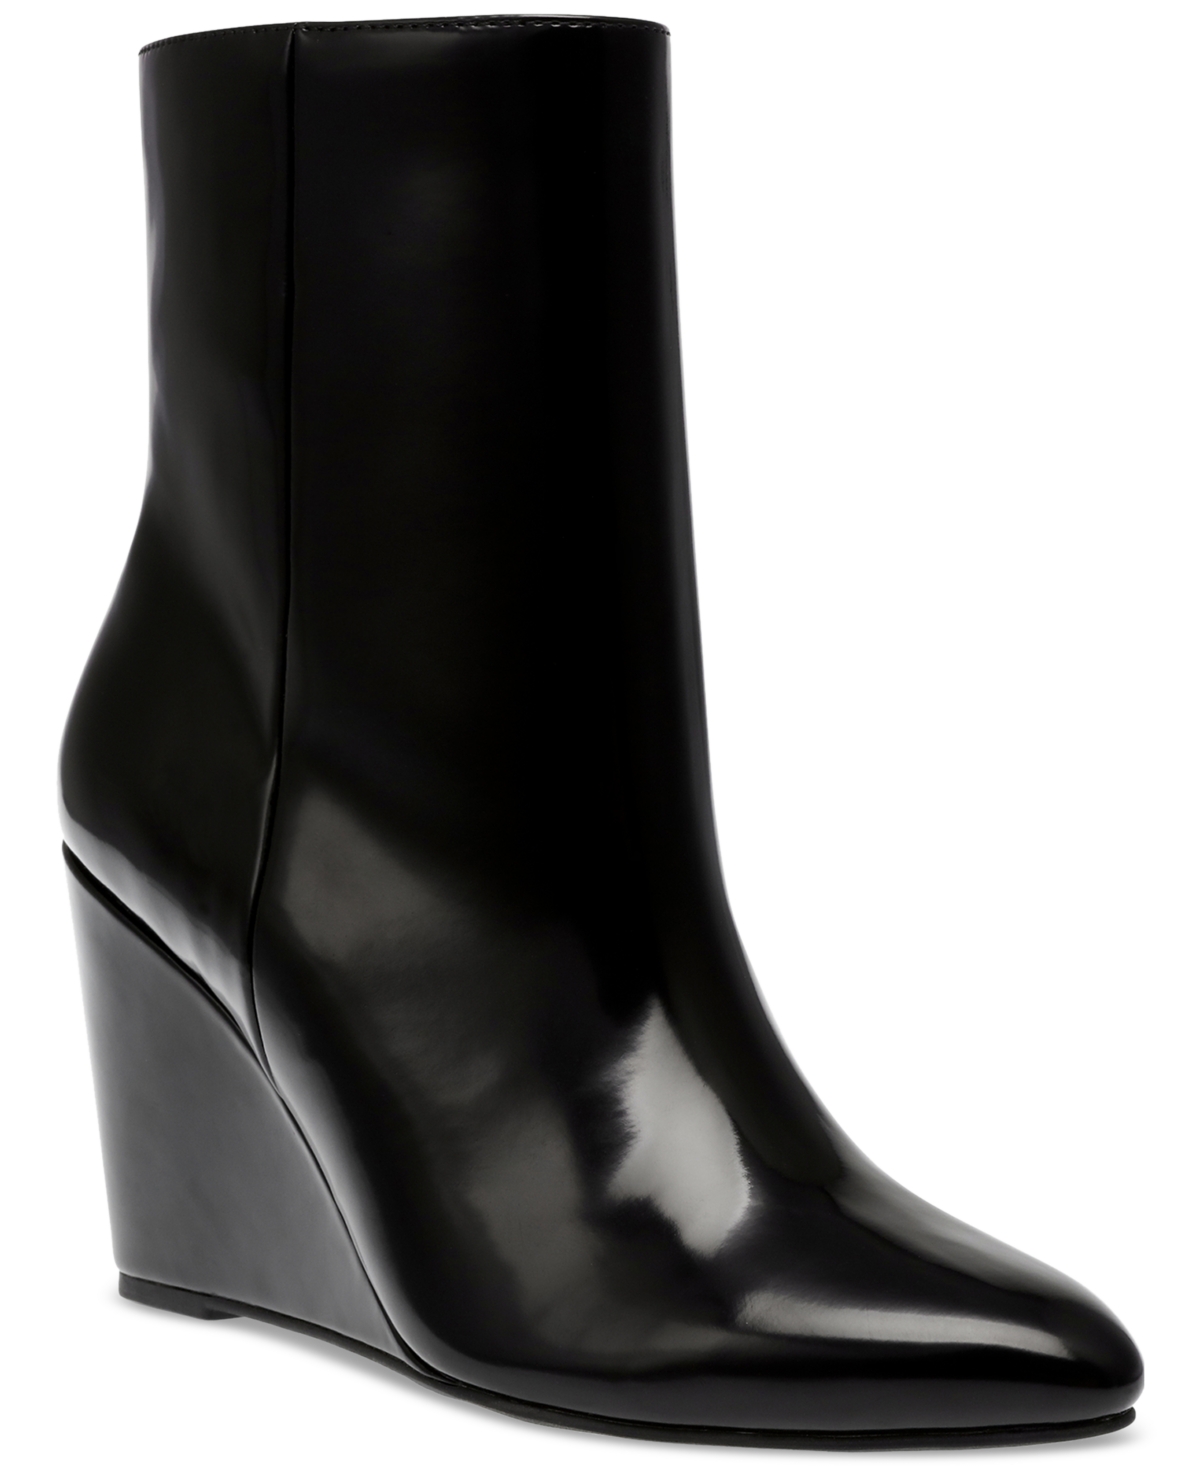 Women's Pascal Pointed Toe Wedge Booties - Black